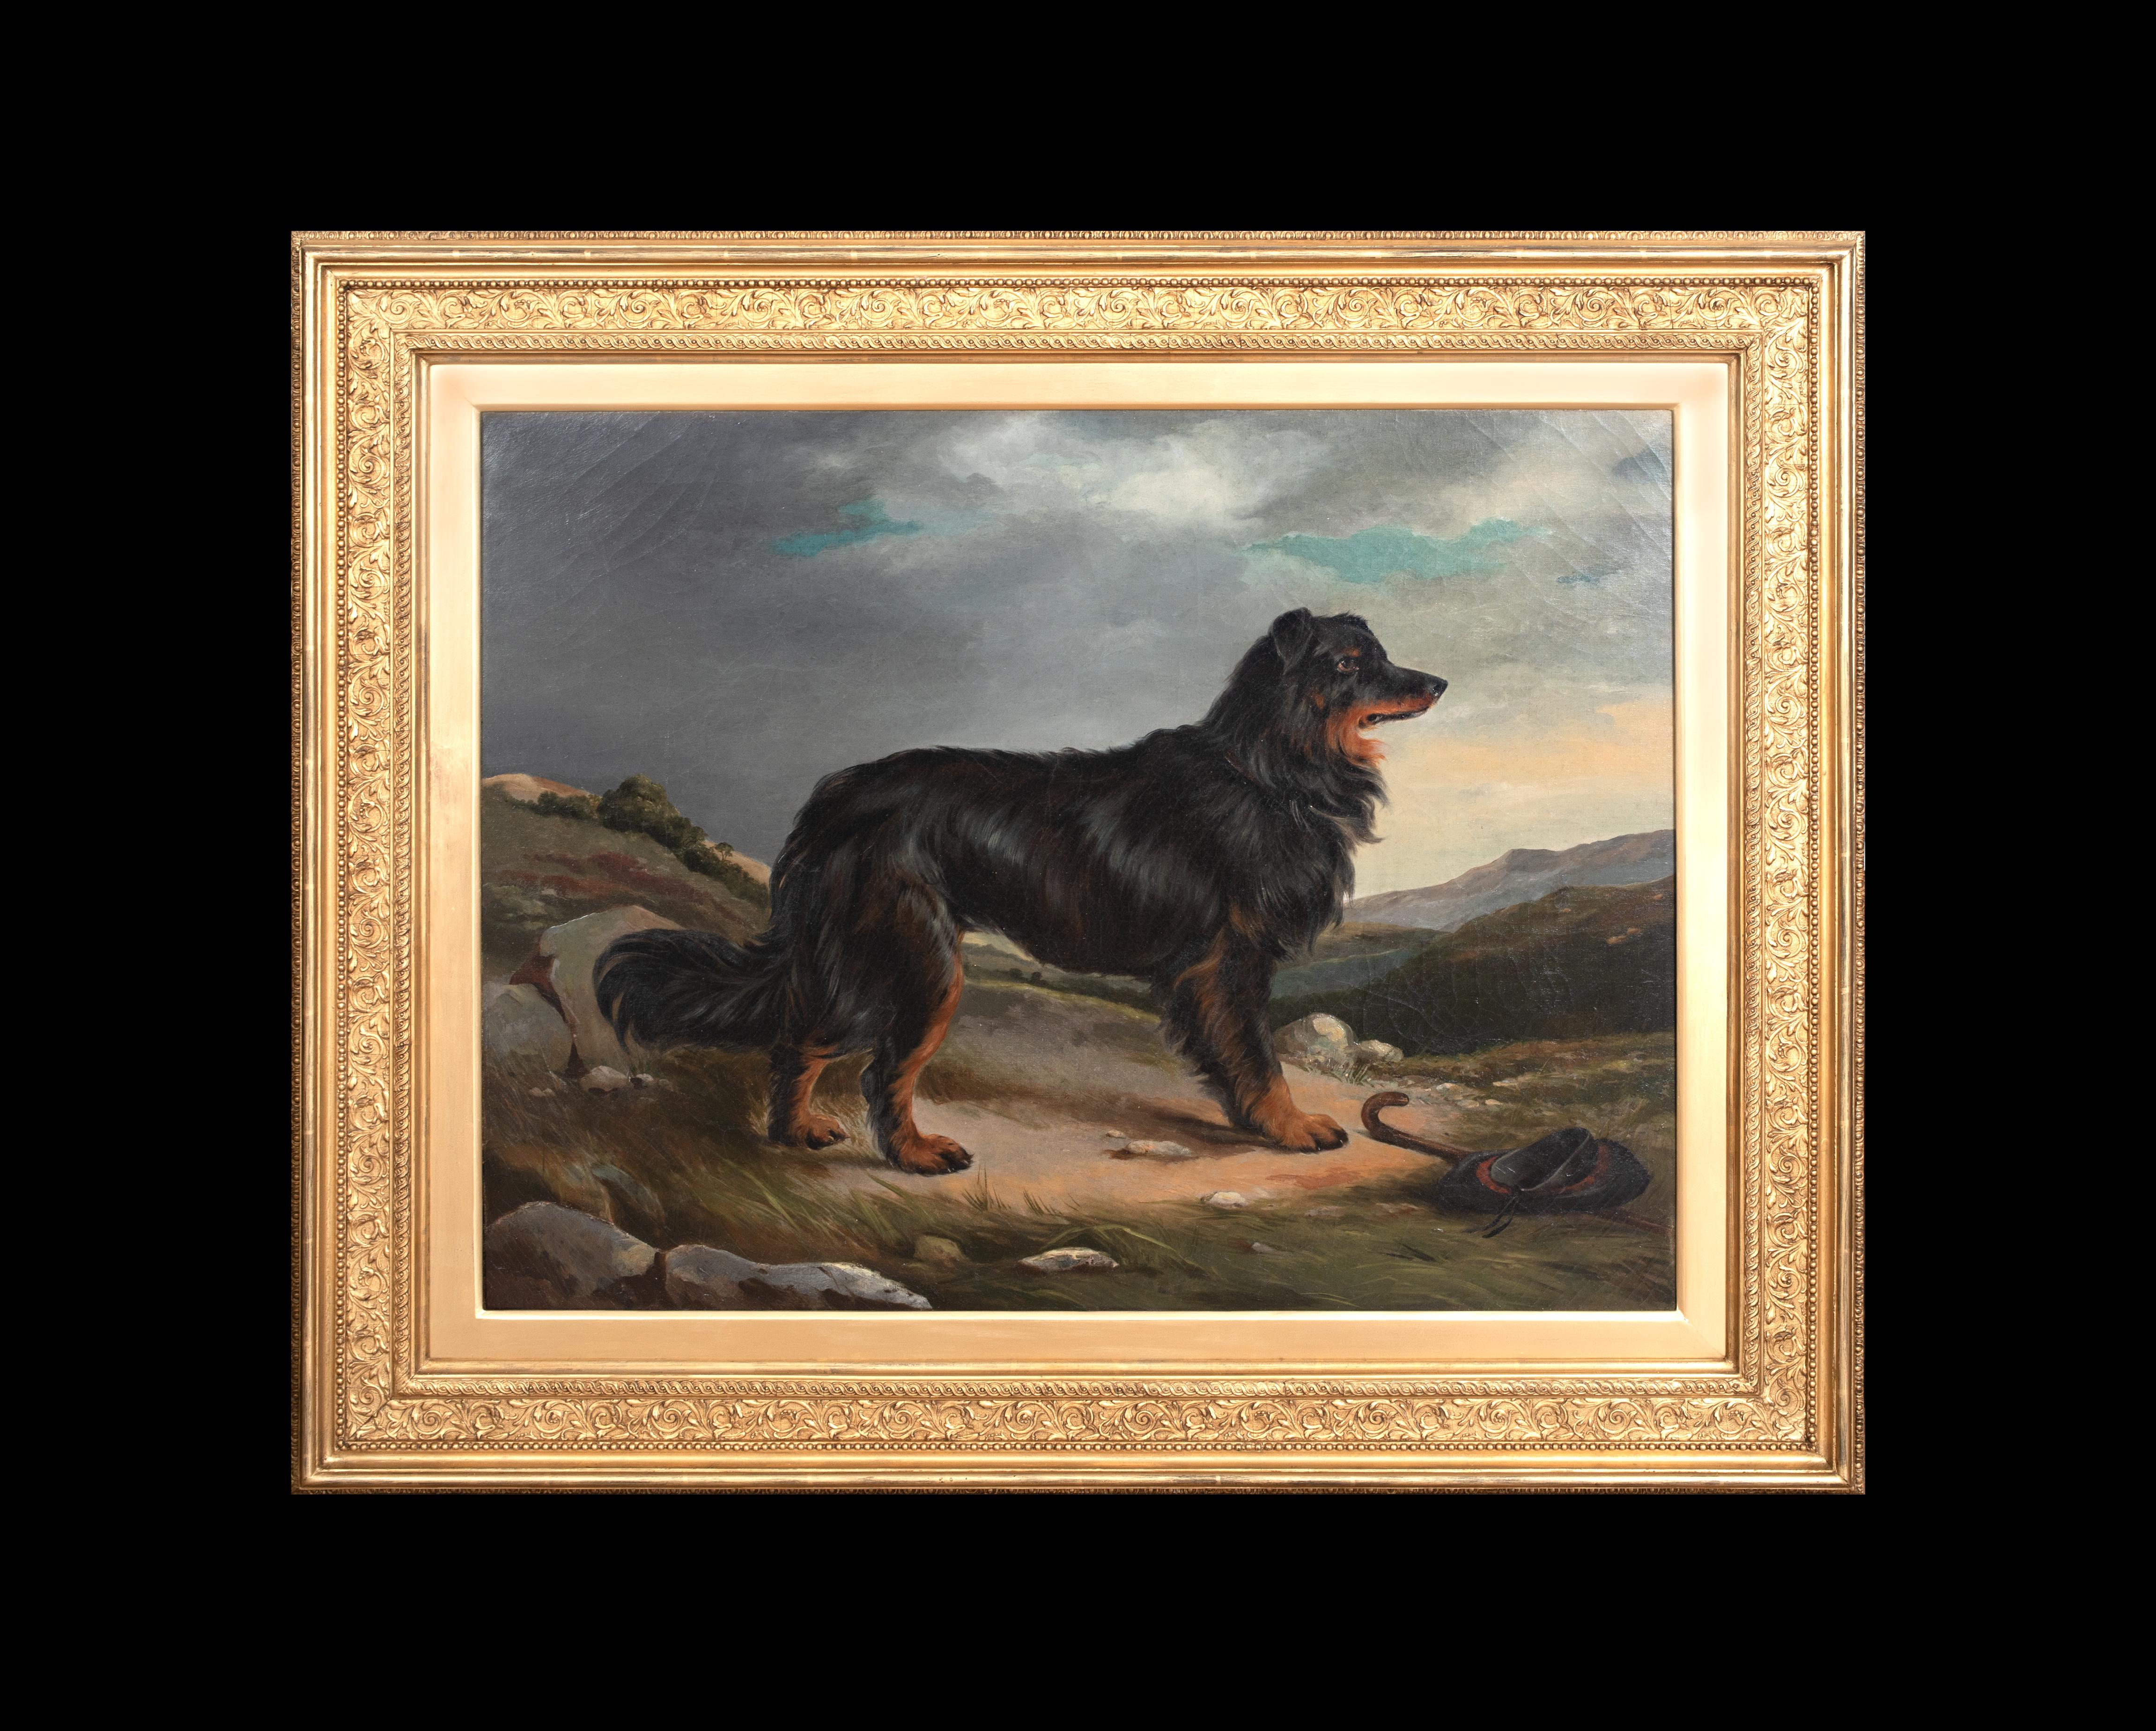 Black & Tan Border Collie In The Highlands, 19th Century  - Painting by Sir Edwin Landseer